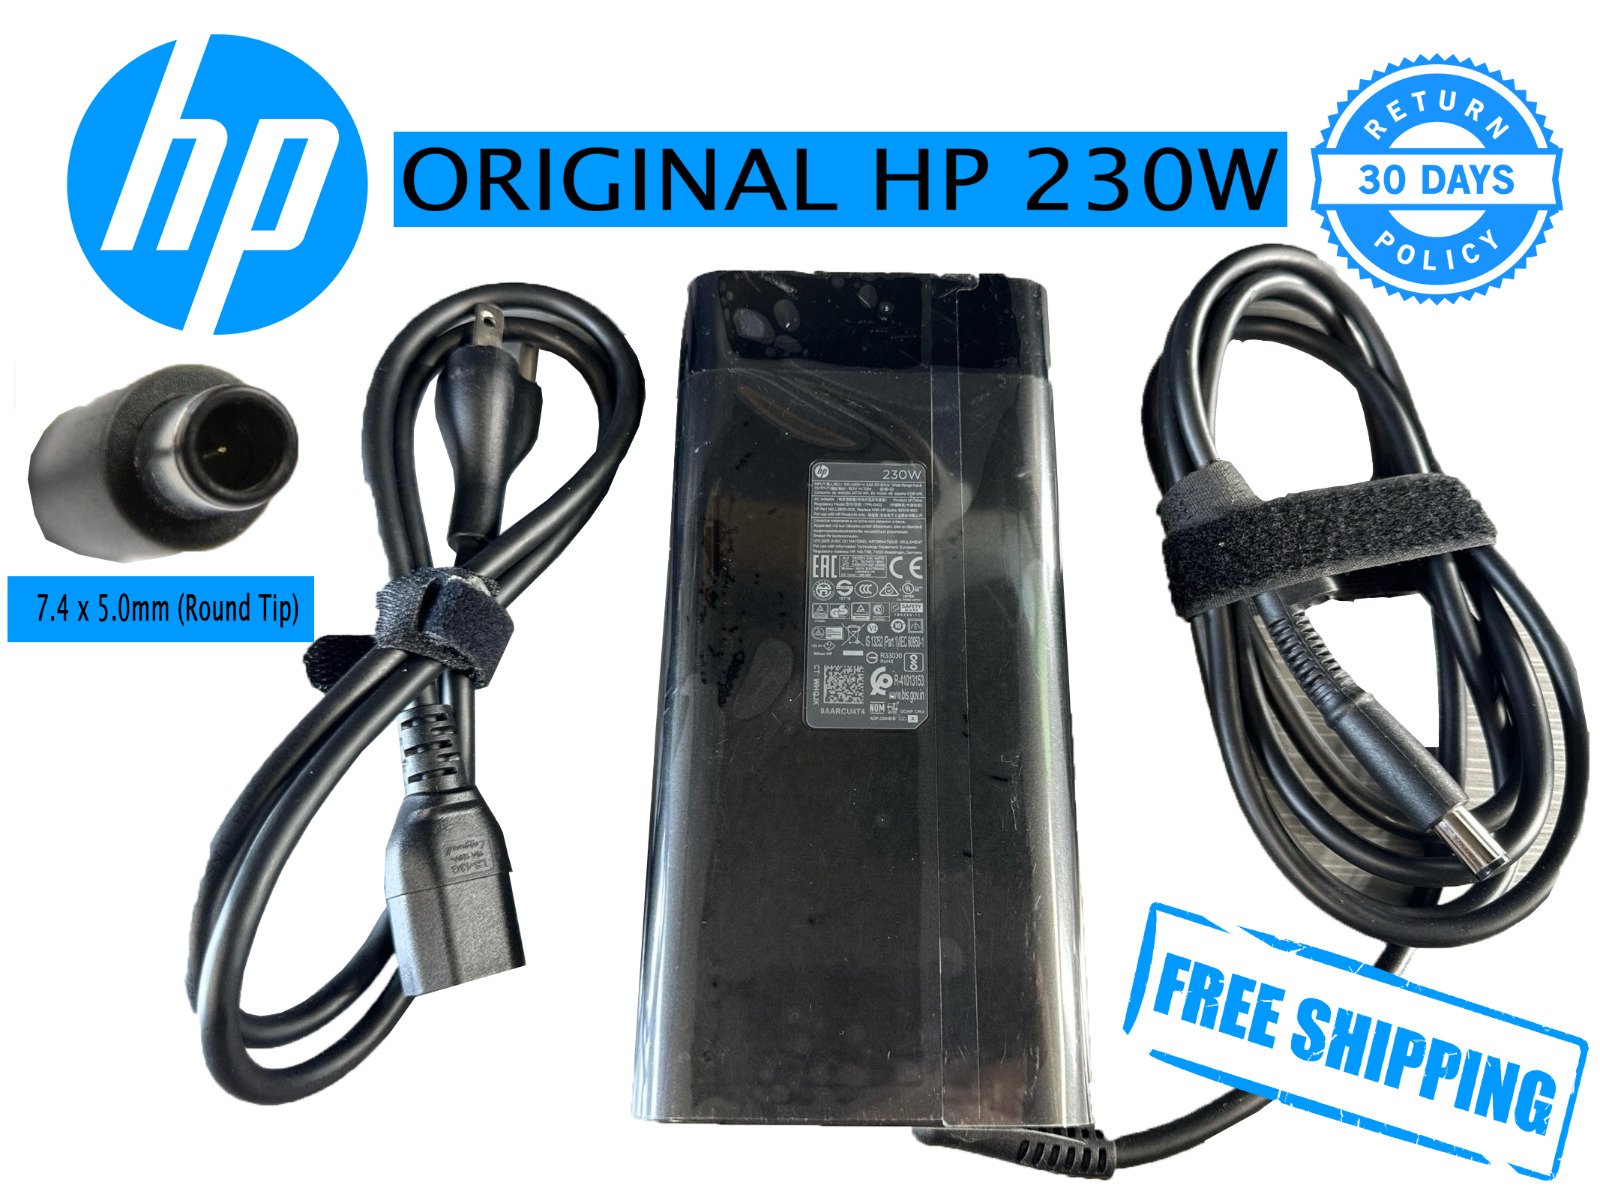 Original HP 230W AC Adapter Charger 19.5V 11.8A